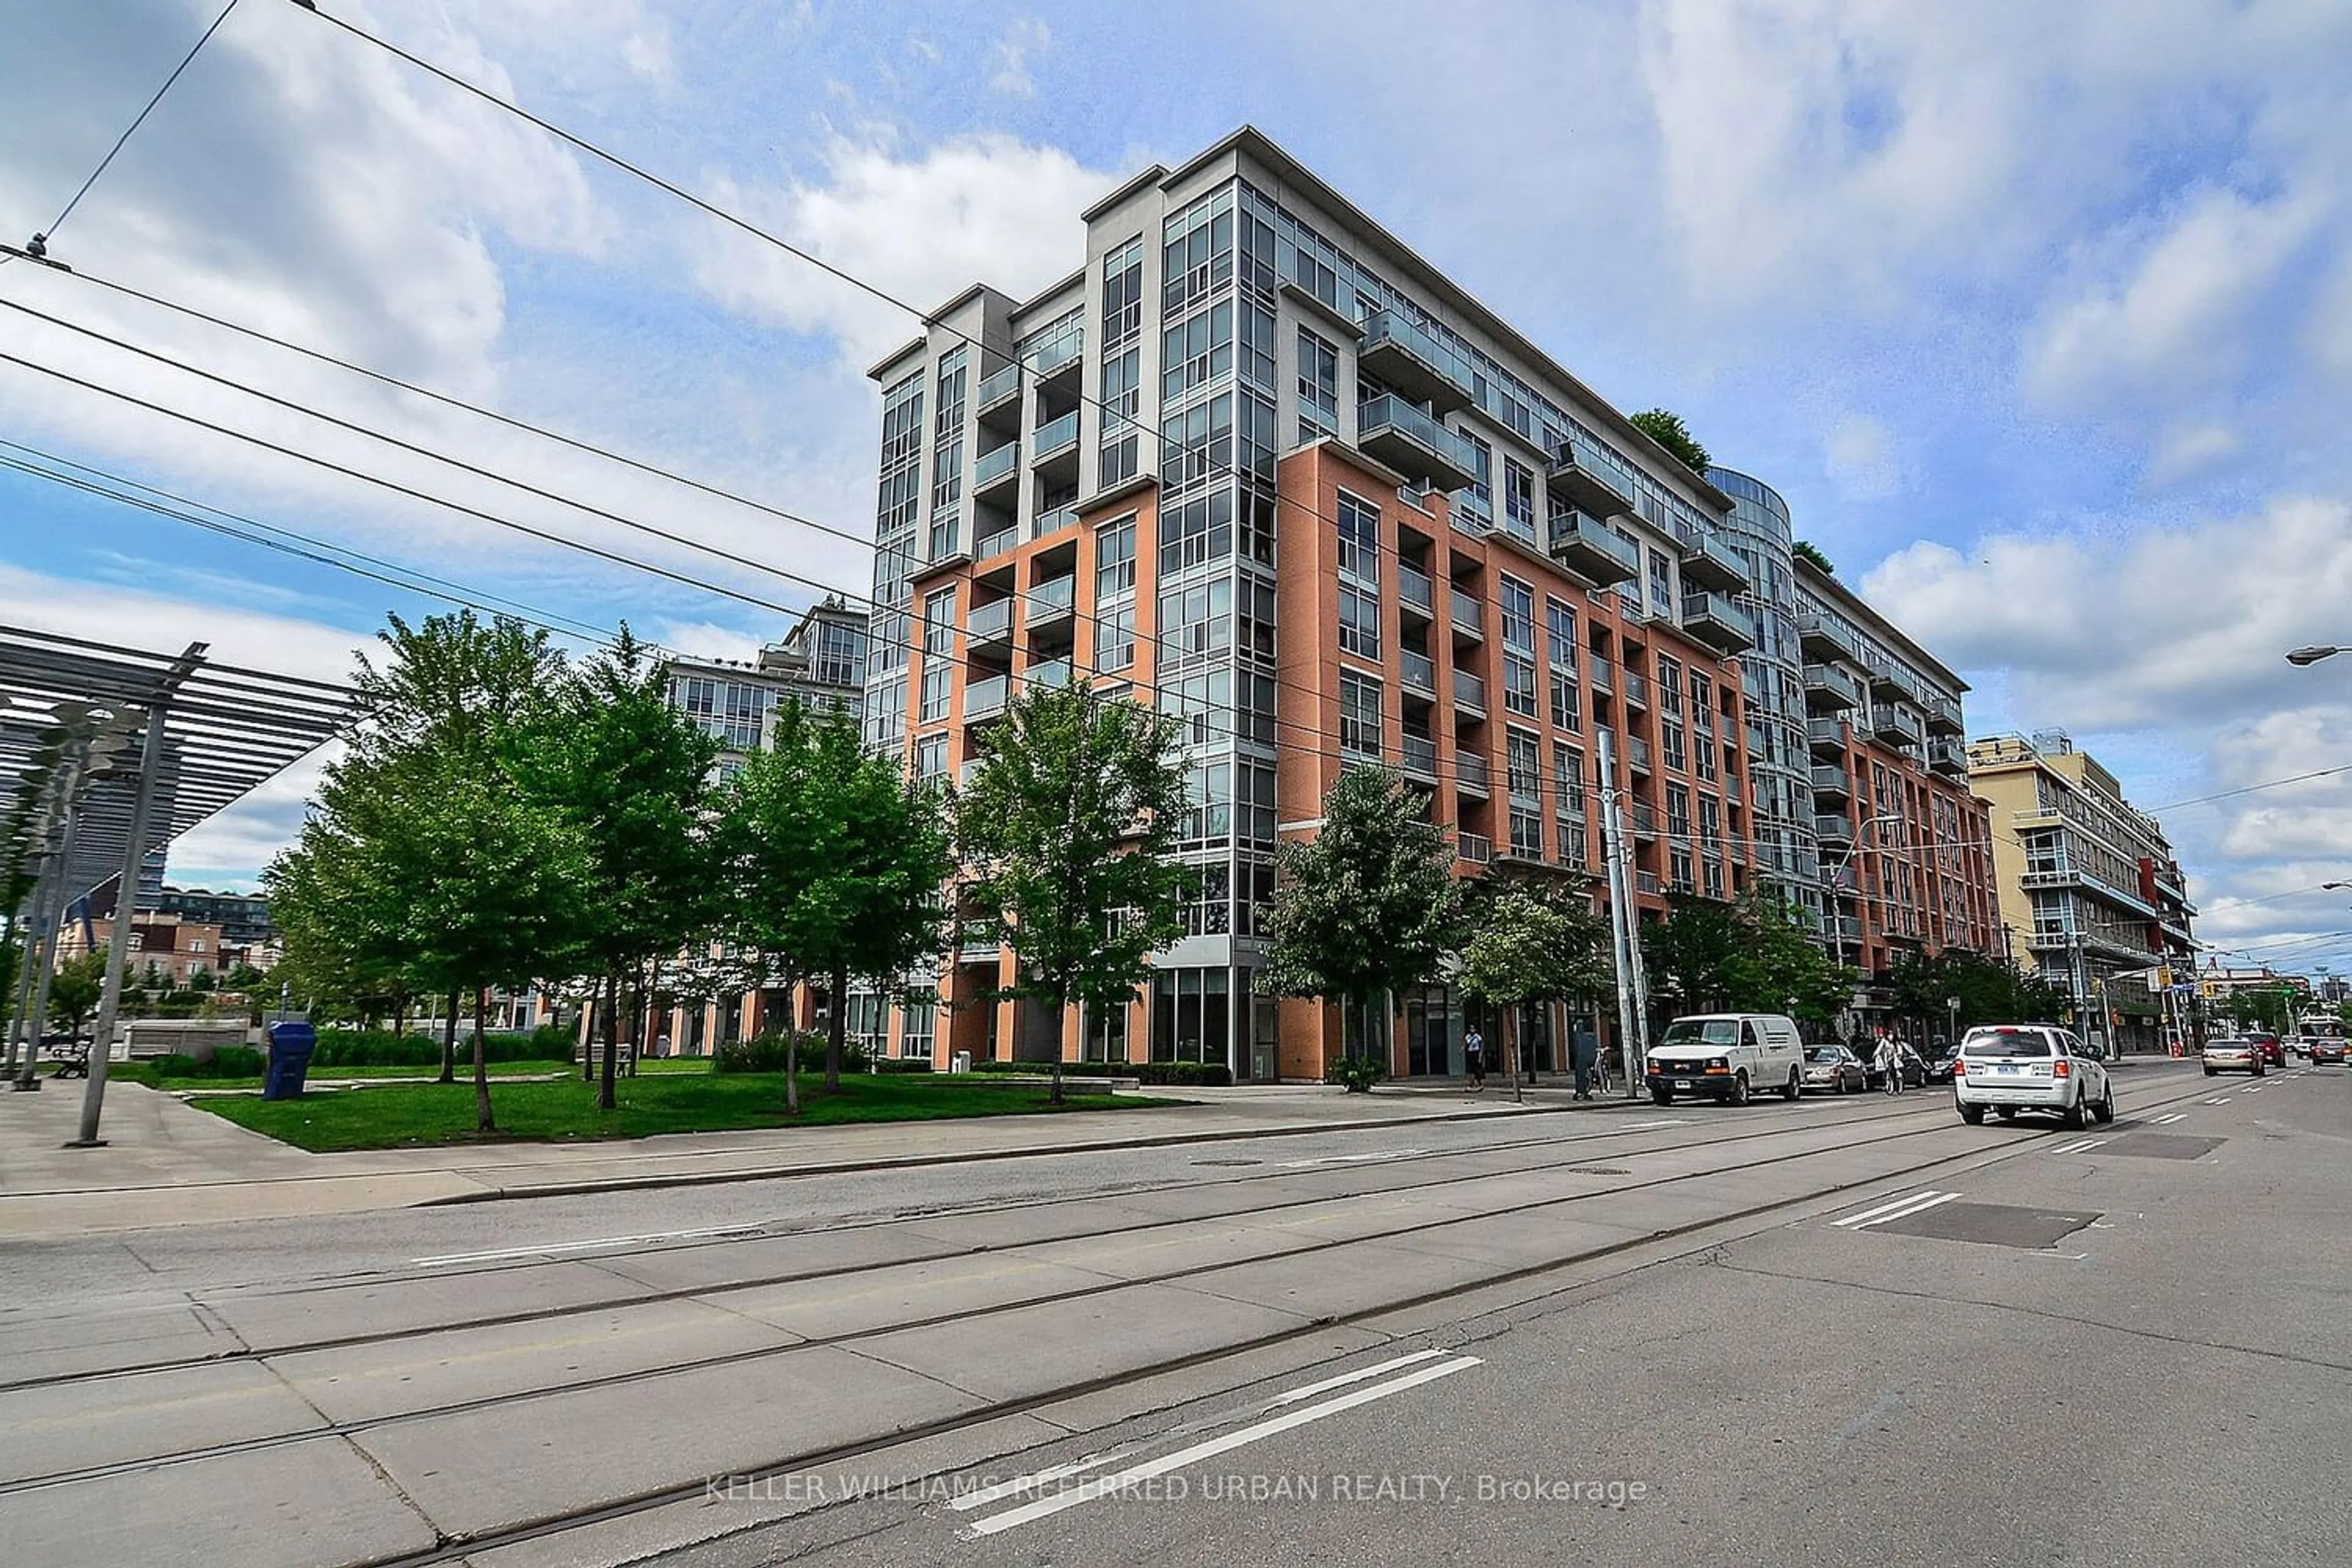 A pic from exterior of the house or condo for 1005 King St #815, Toronto Ontario M6K 3M8